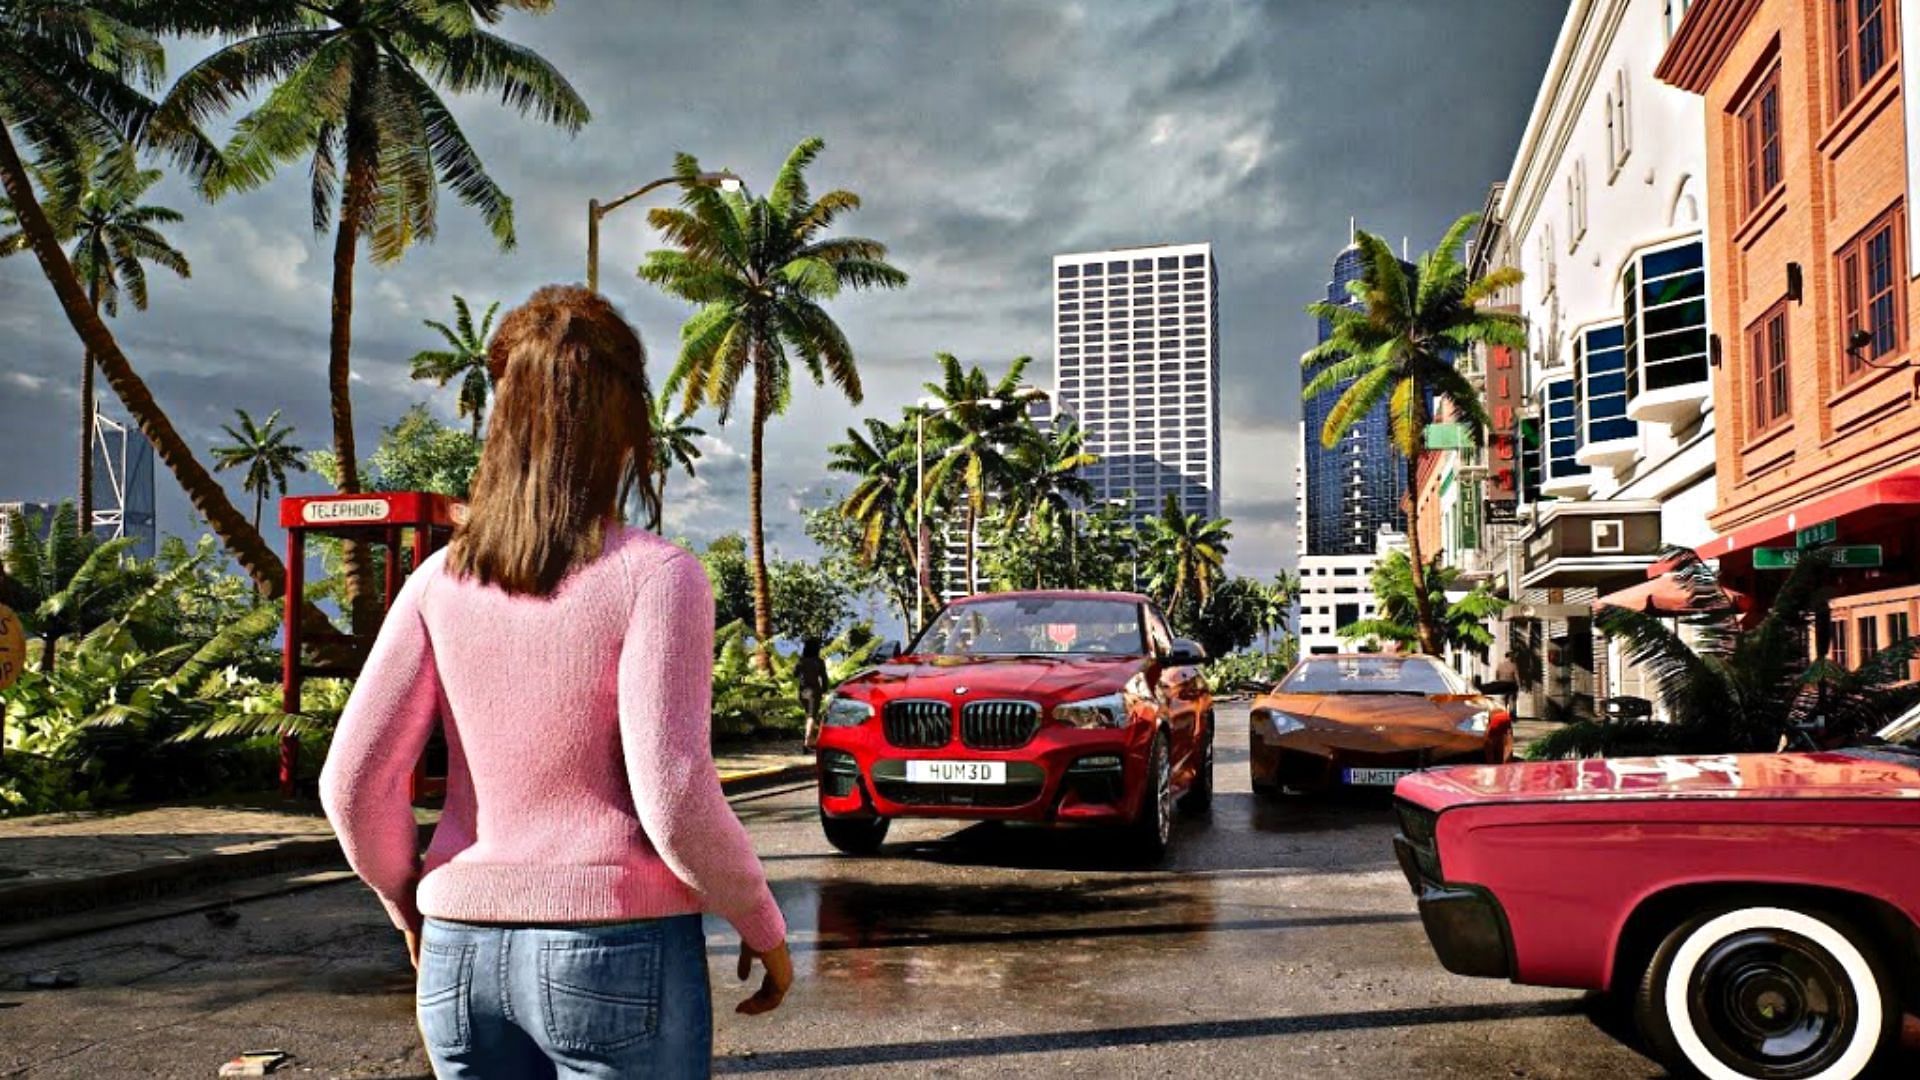 New GTA 6 map leak shows updated look at Vice City - Charlie INTEL